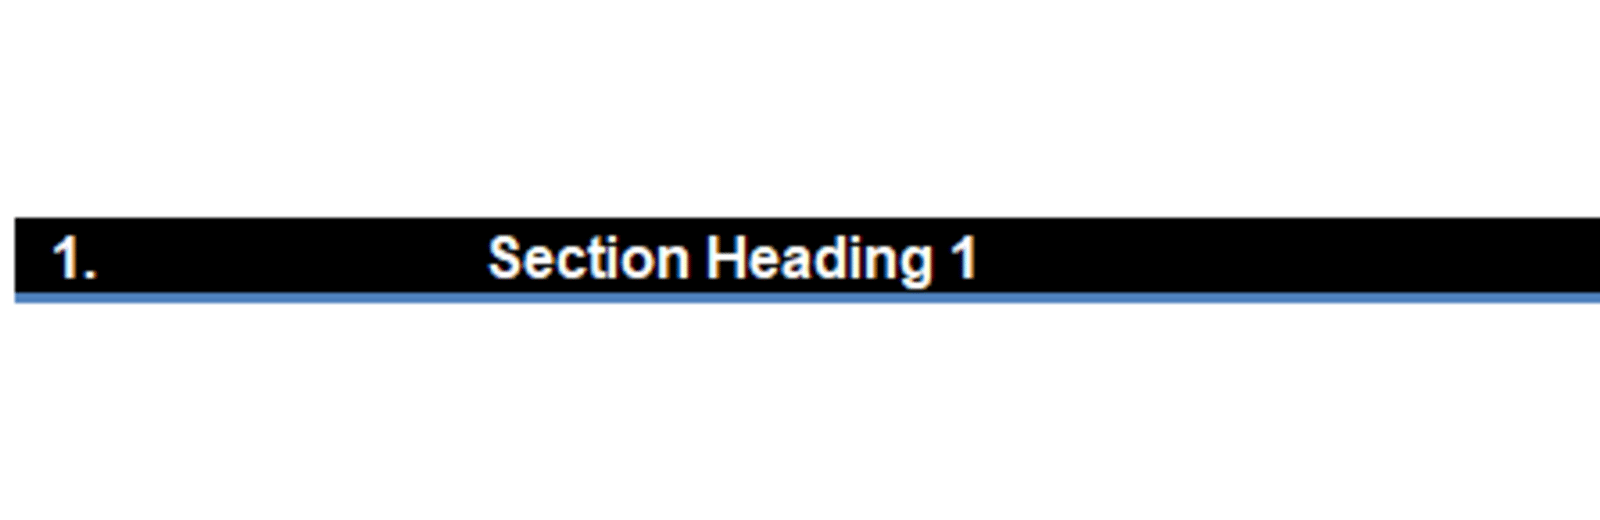 Section header example